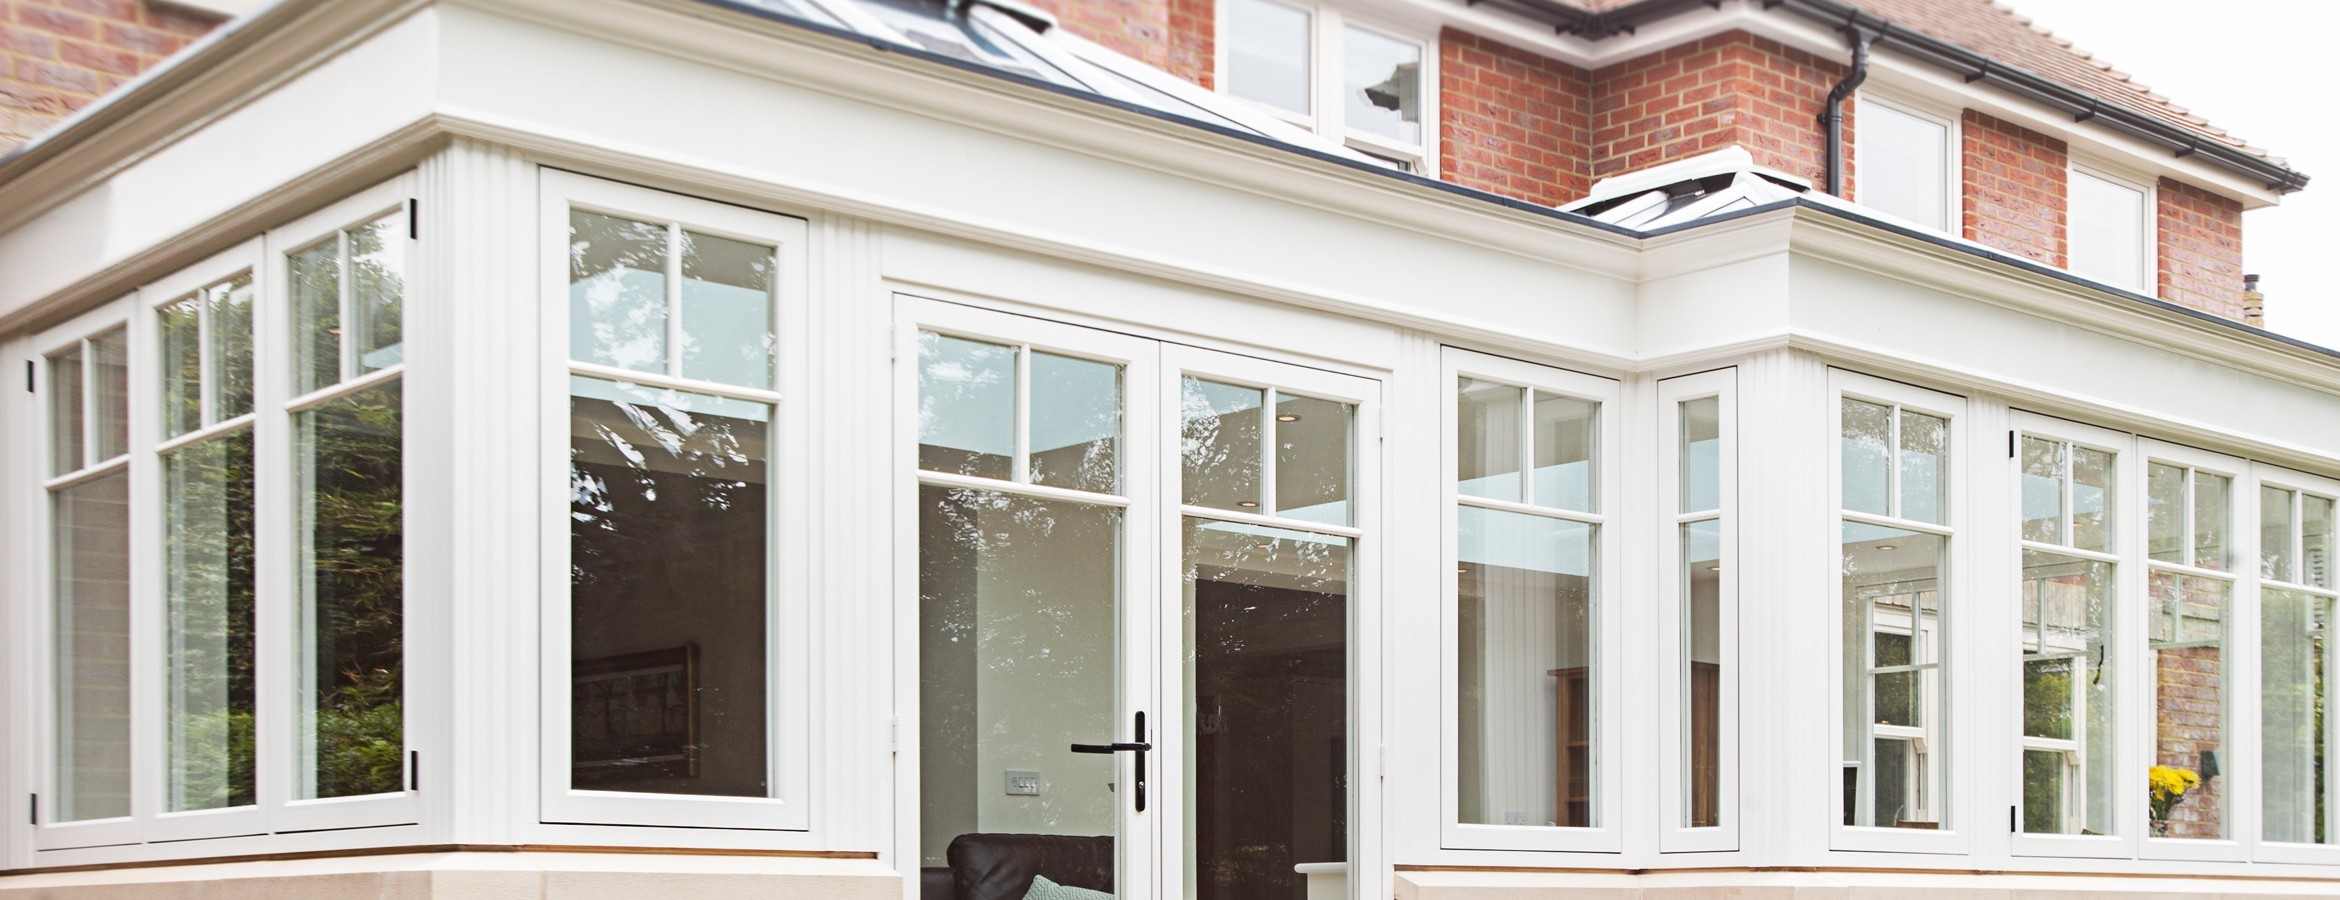 UPVC Windows installed by Crittall Installations in Kent